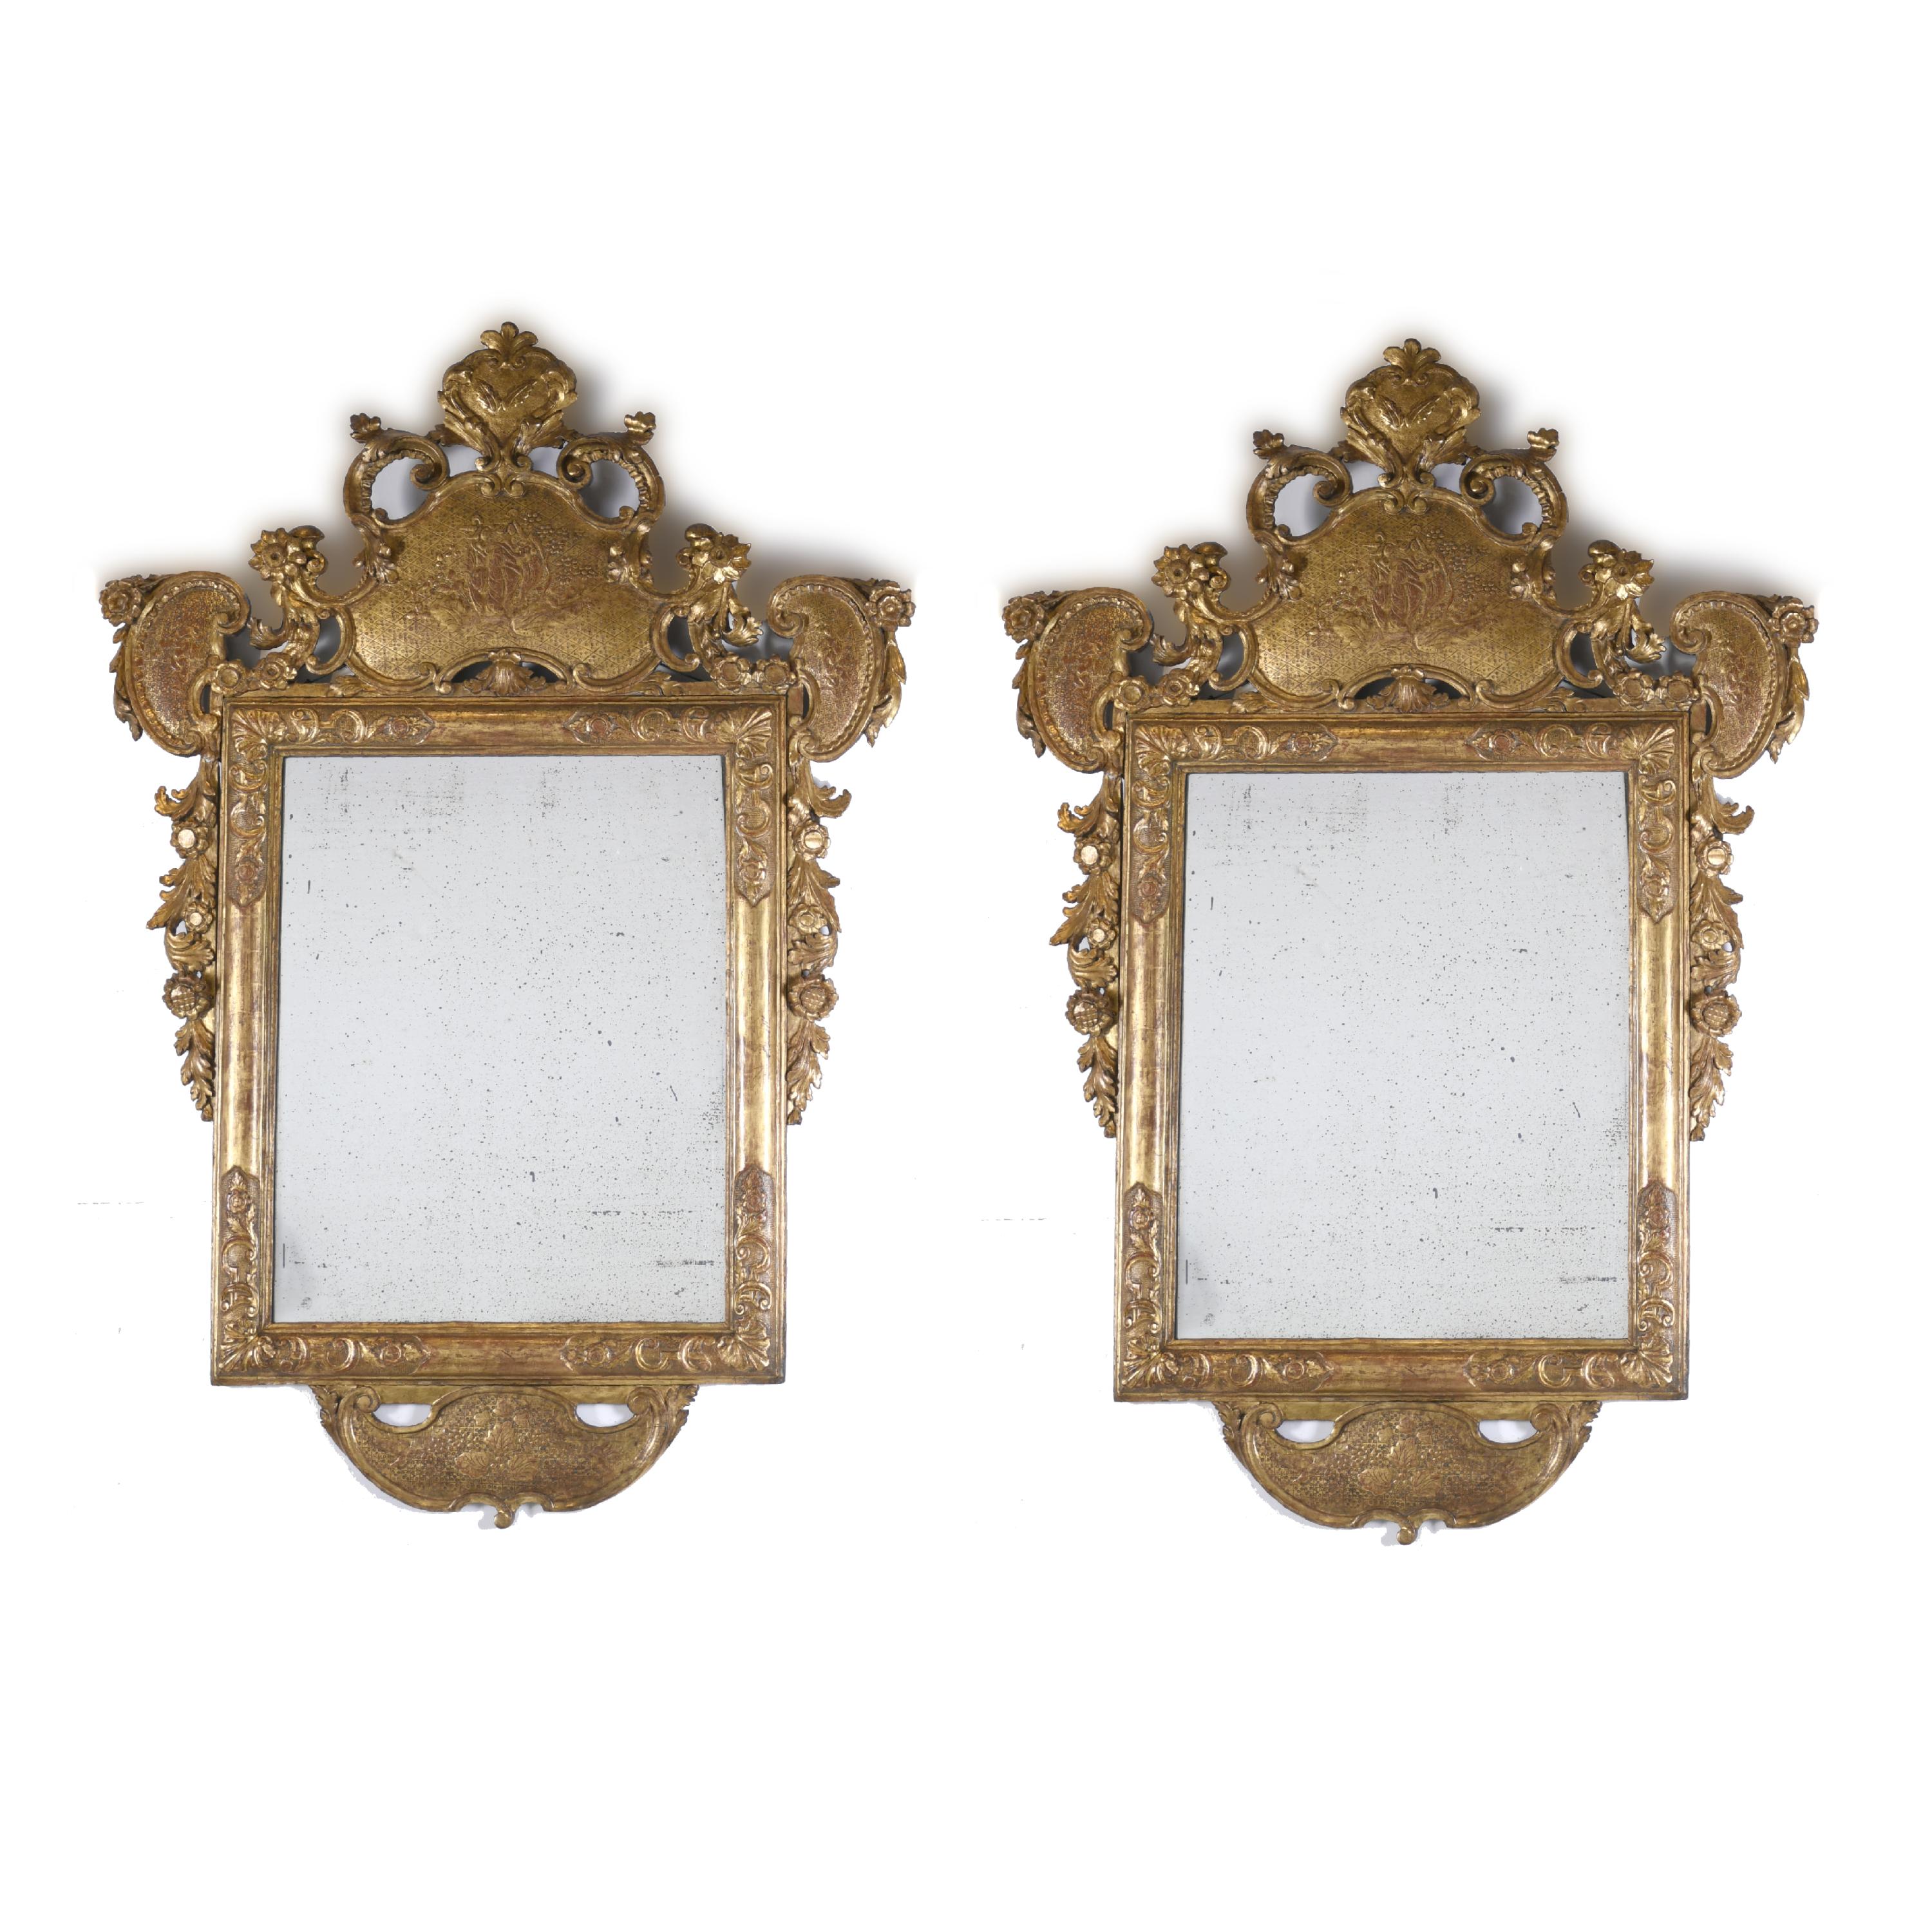 TWO LARGE WALL MIRRORS, 19TH CENTURY.